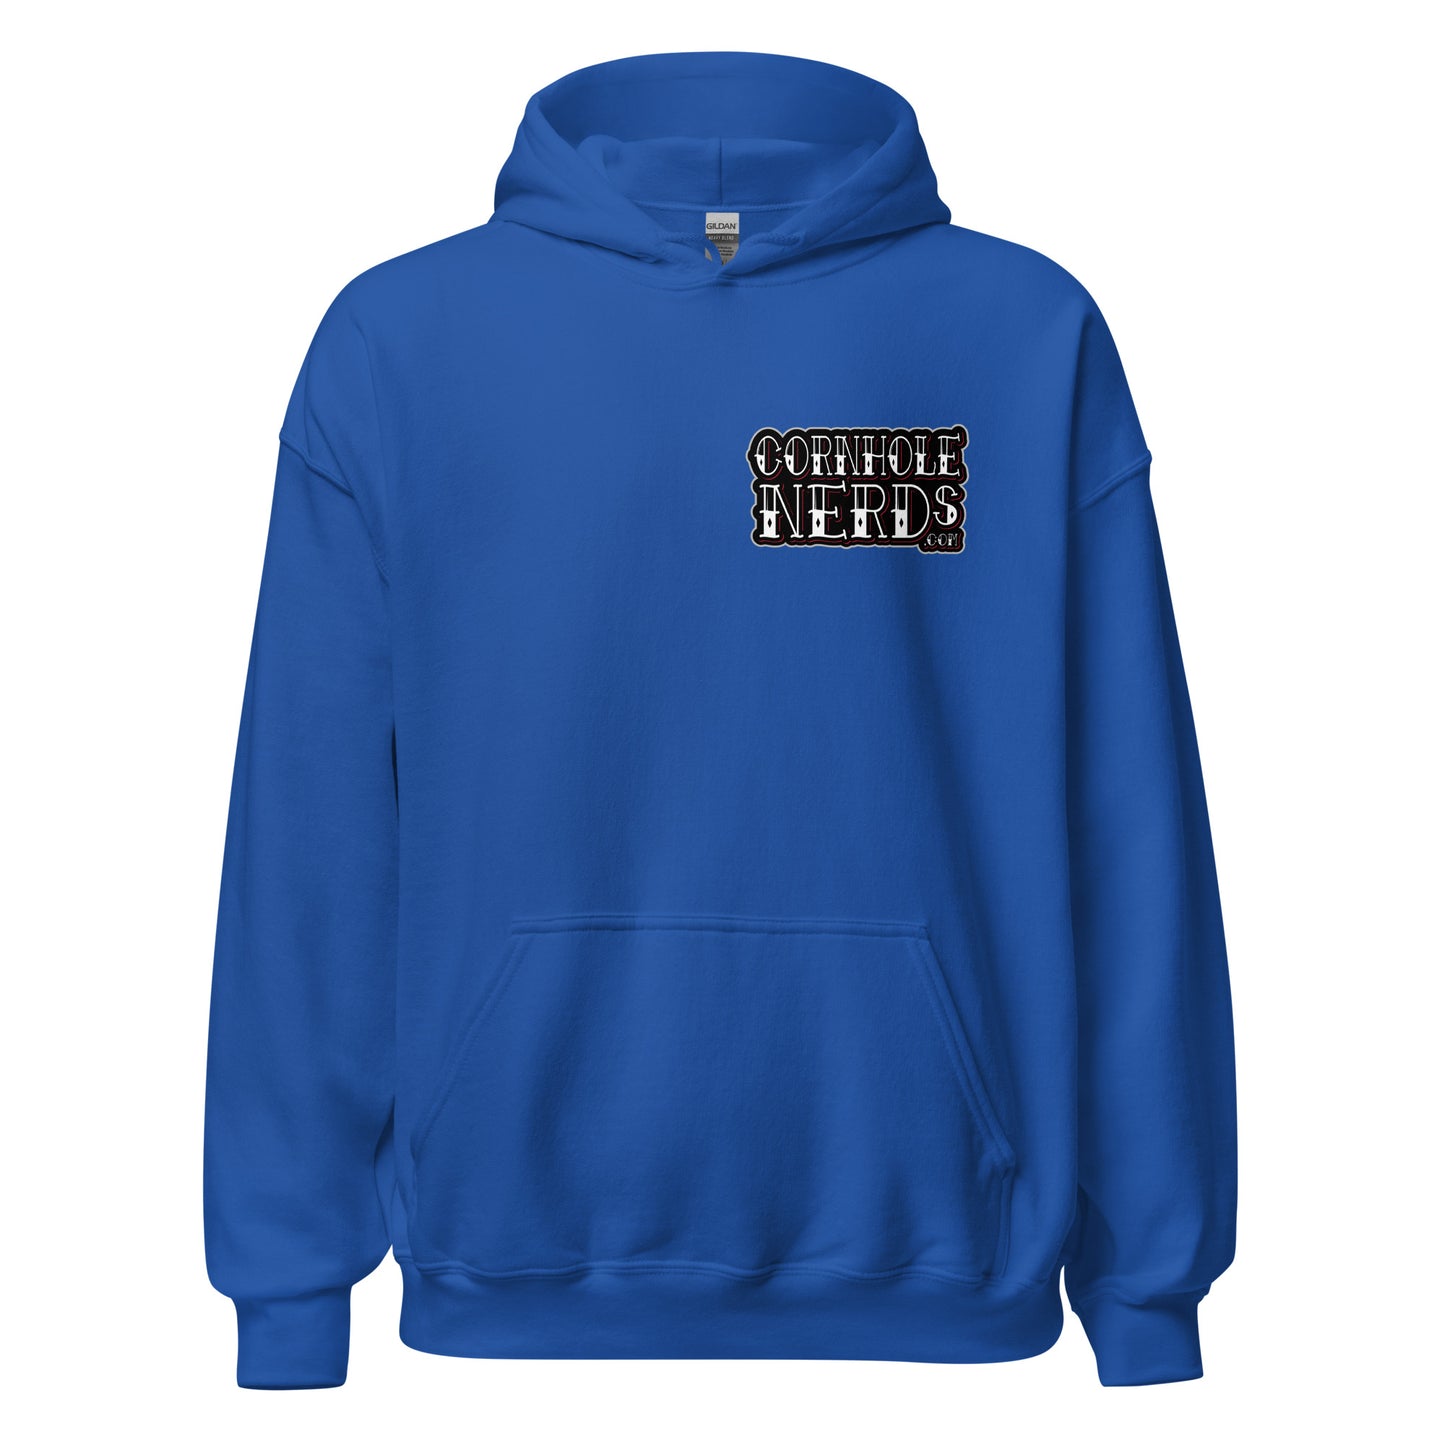 Tattoo Nerds front and back logos Unisex Hoodie